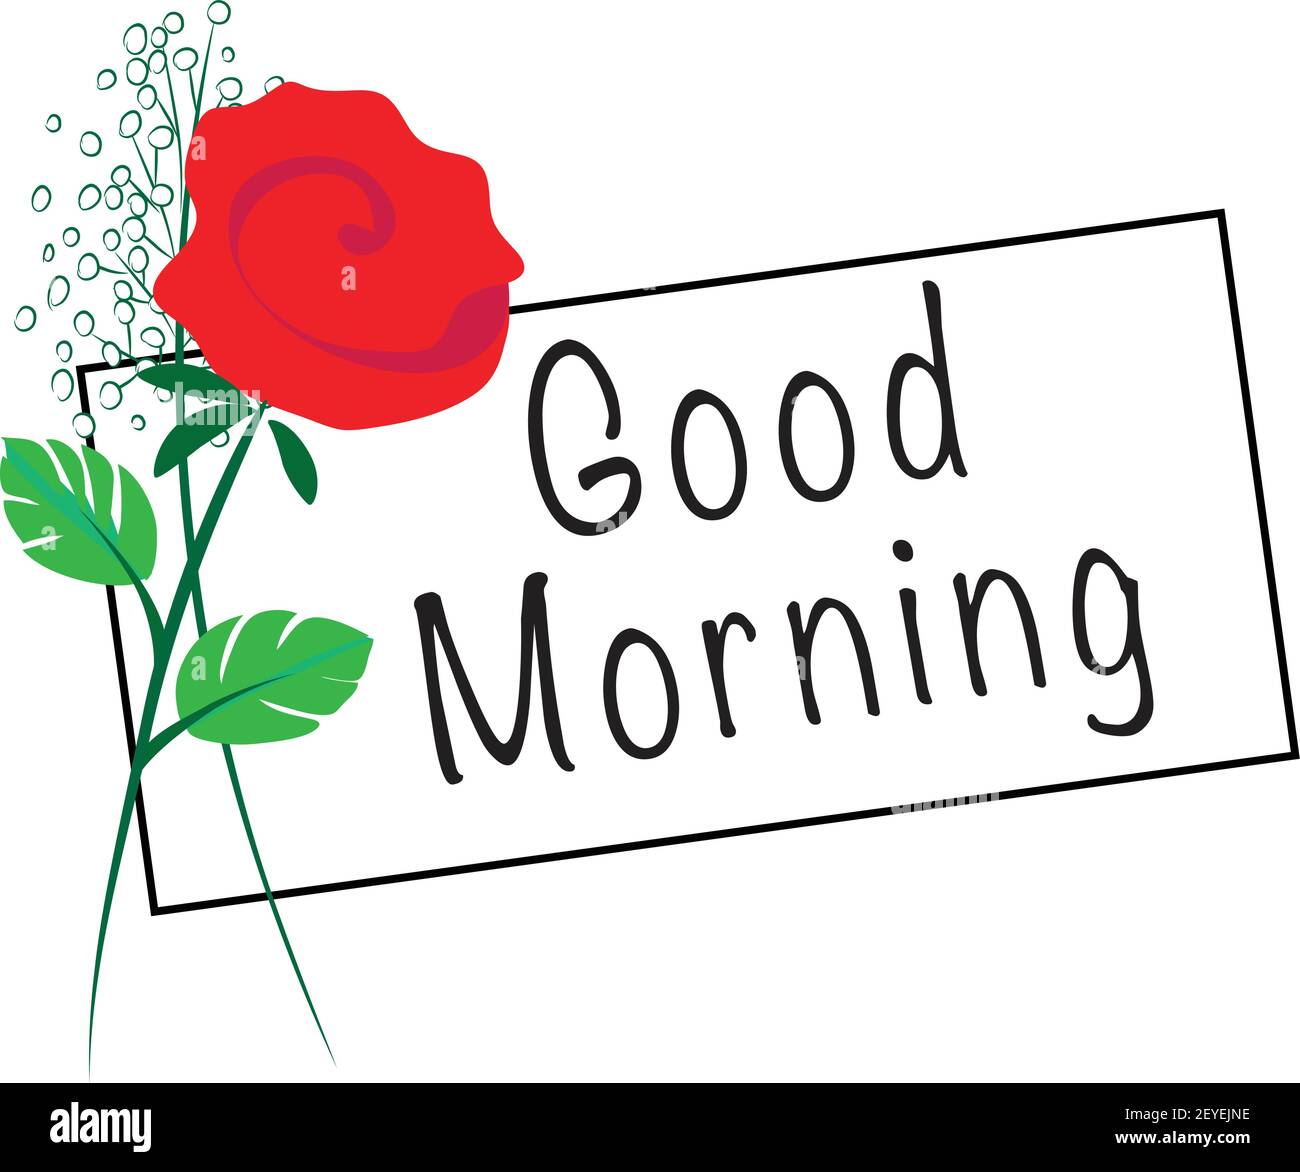 Good morning rose Stock Vector Images - Alamy